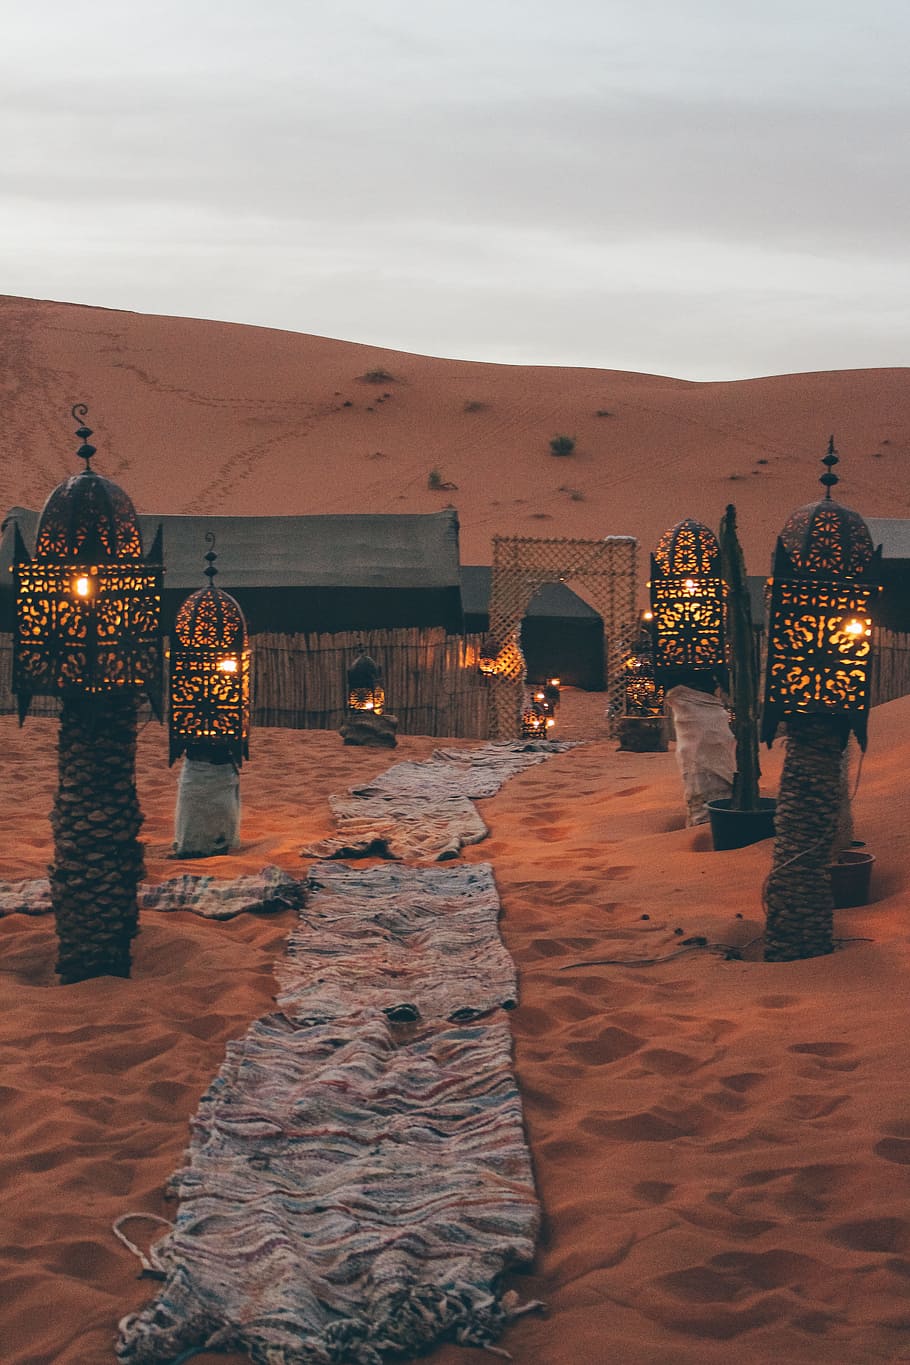 four black metal lamps beside grey pathway, light, north africa